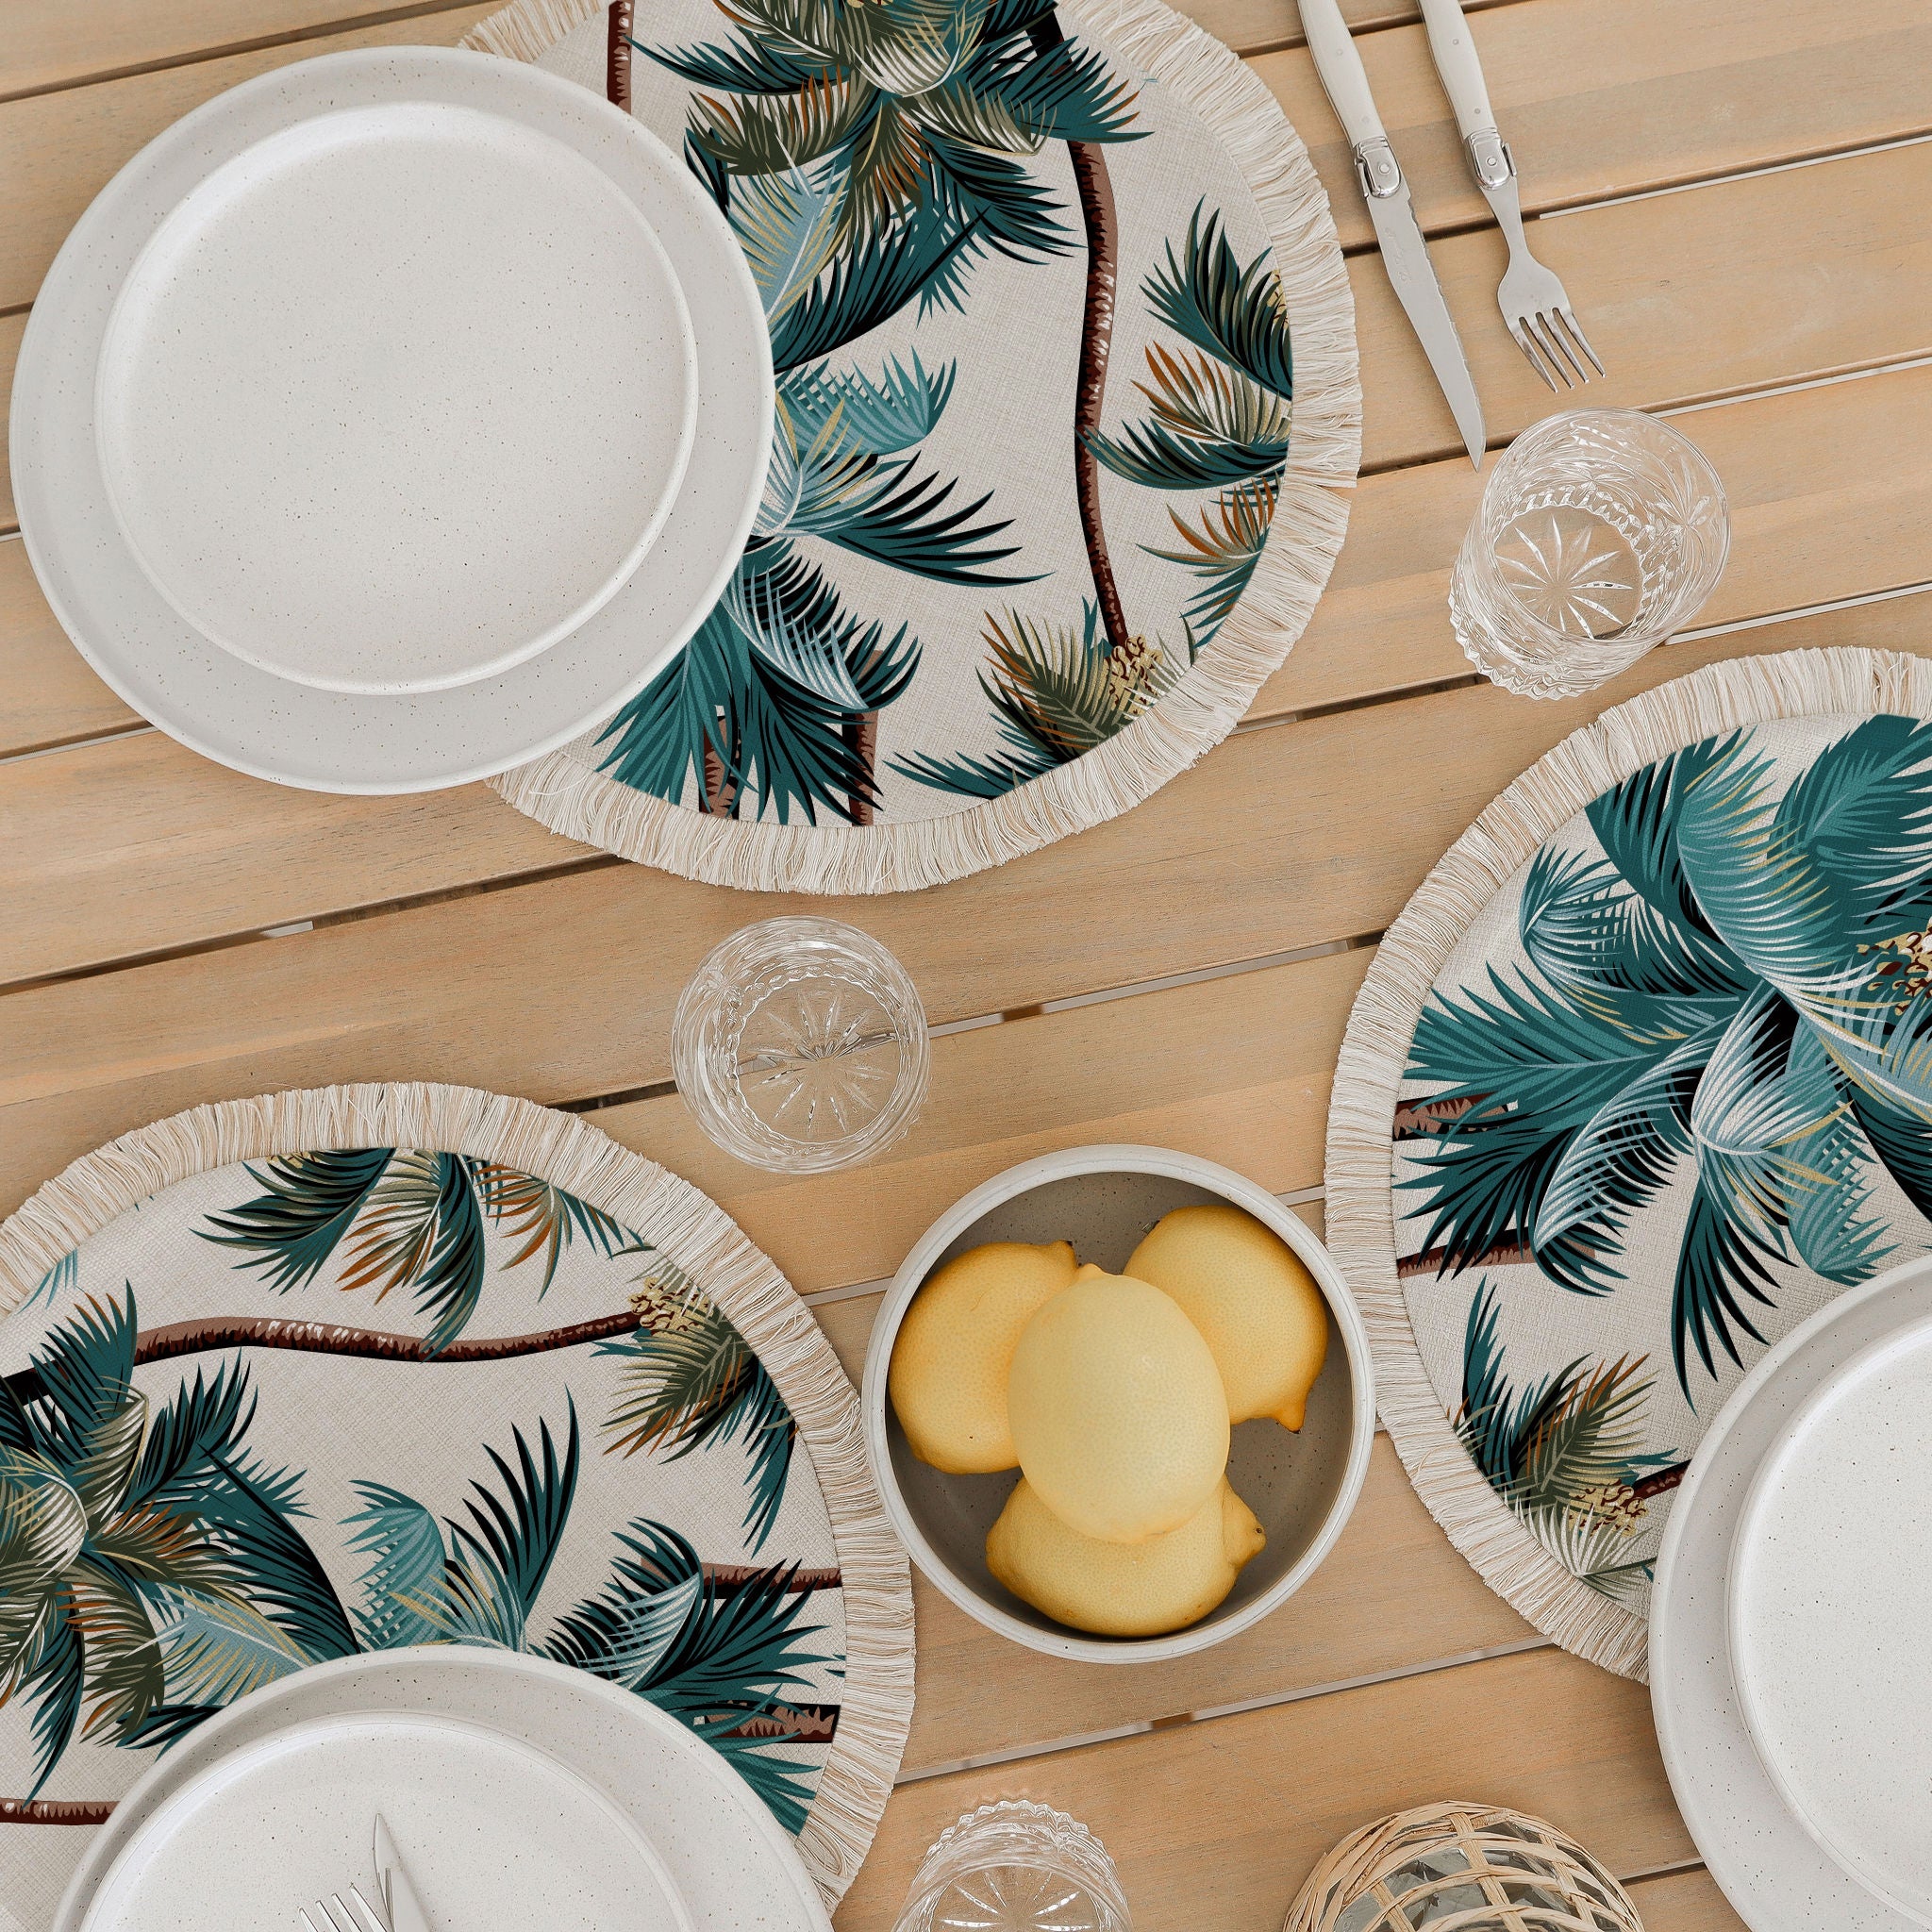 Round Placemat-Palm Trees-Natural-40cm